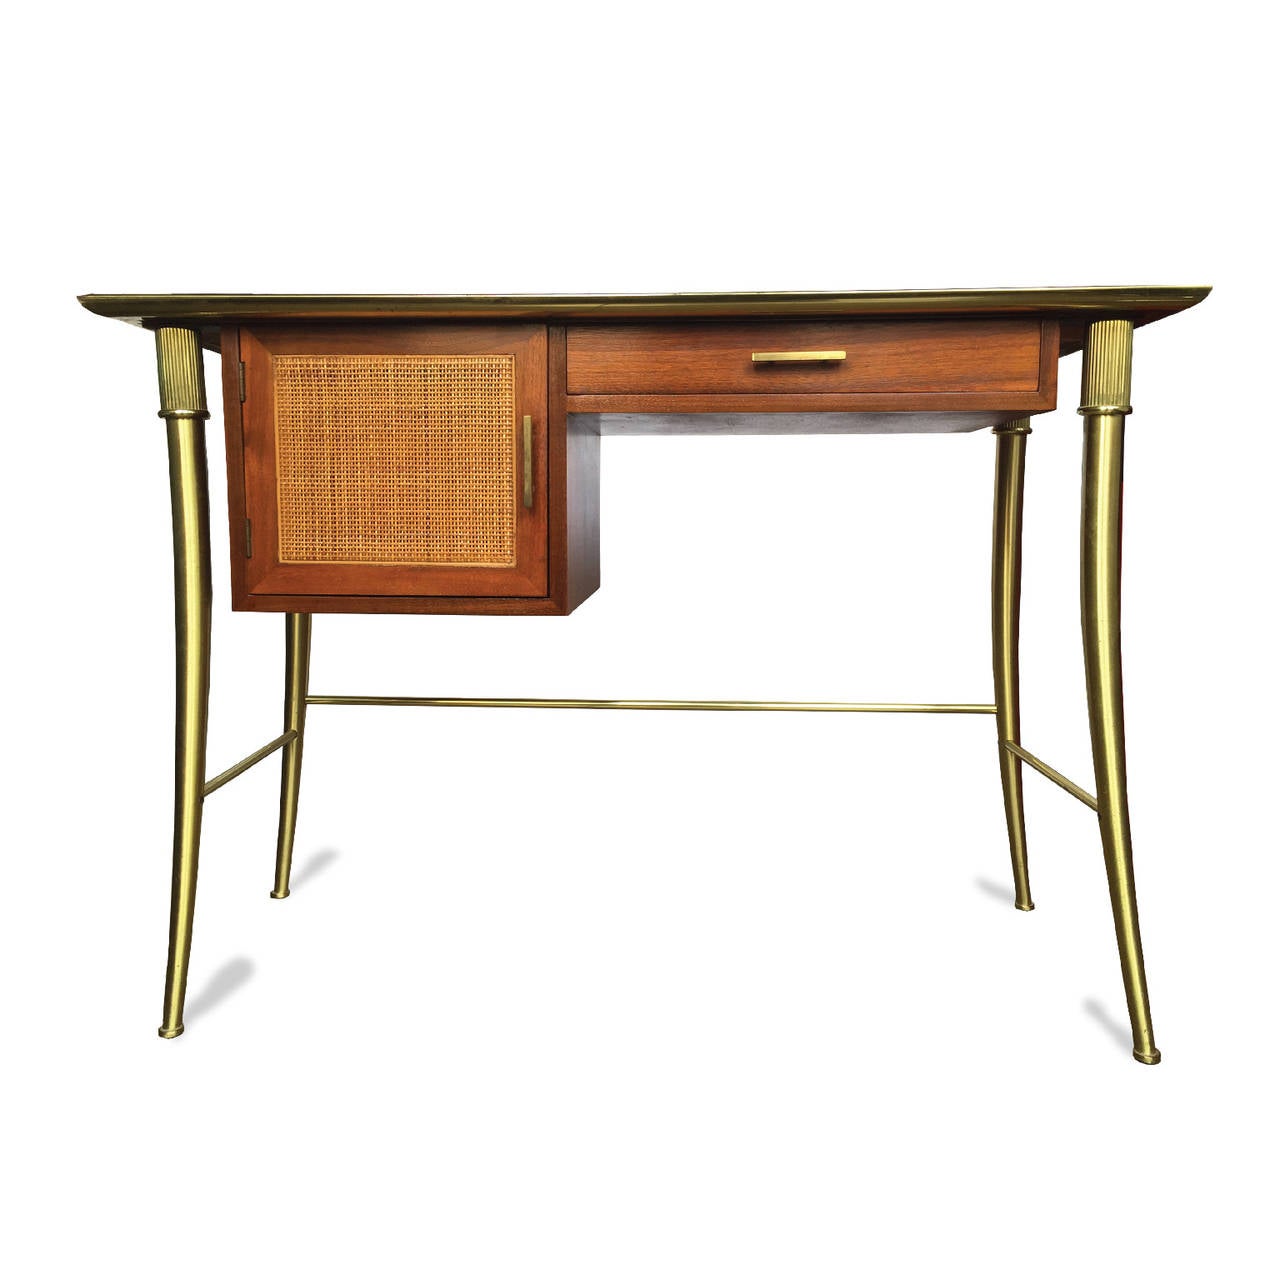 Leather-topped desk with a brass frame, legs, and hardware. The cabinet, door, and drawer are mahogany and the door has a caned front. The accompanying chair is brass with an original upholstered seat.
Measures: Desk: H 30